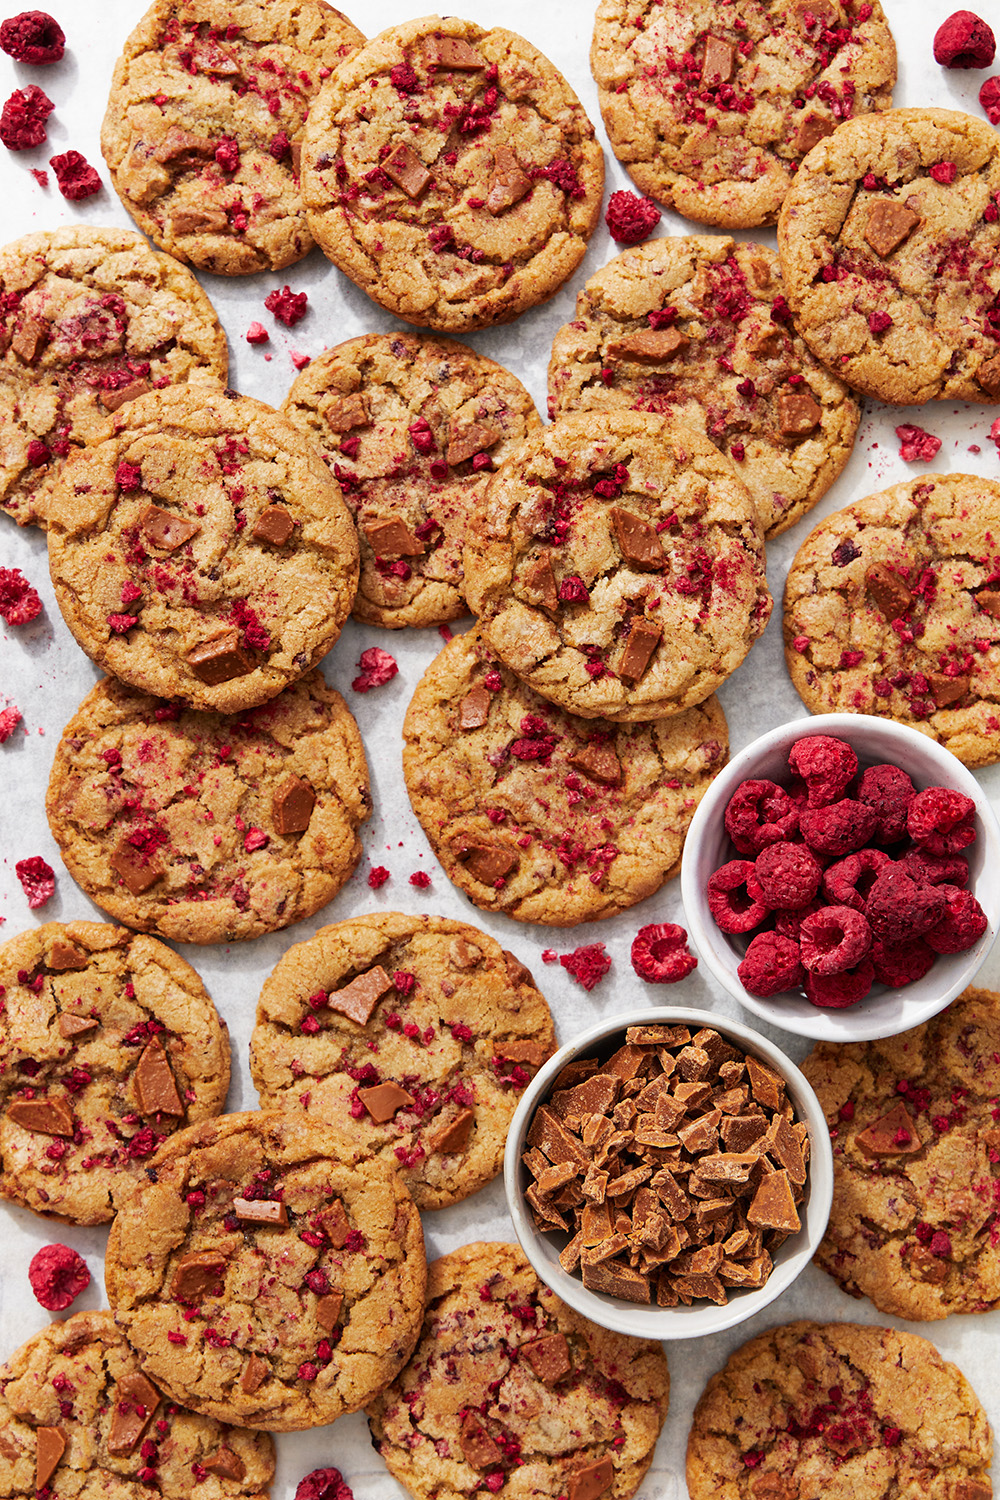 caramelized white chocolate cookies, with small bowls of freeze-dried raspberry pieces and chopped caramelized white chocolate around the cookies